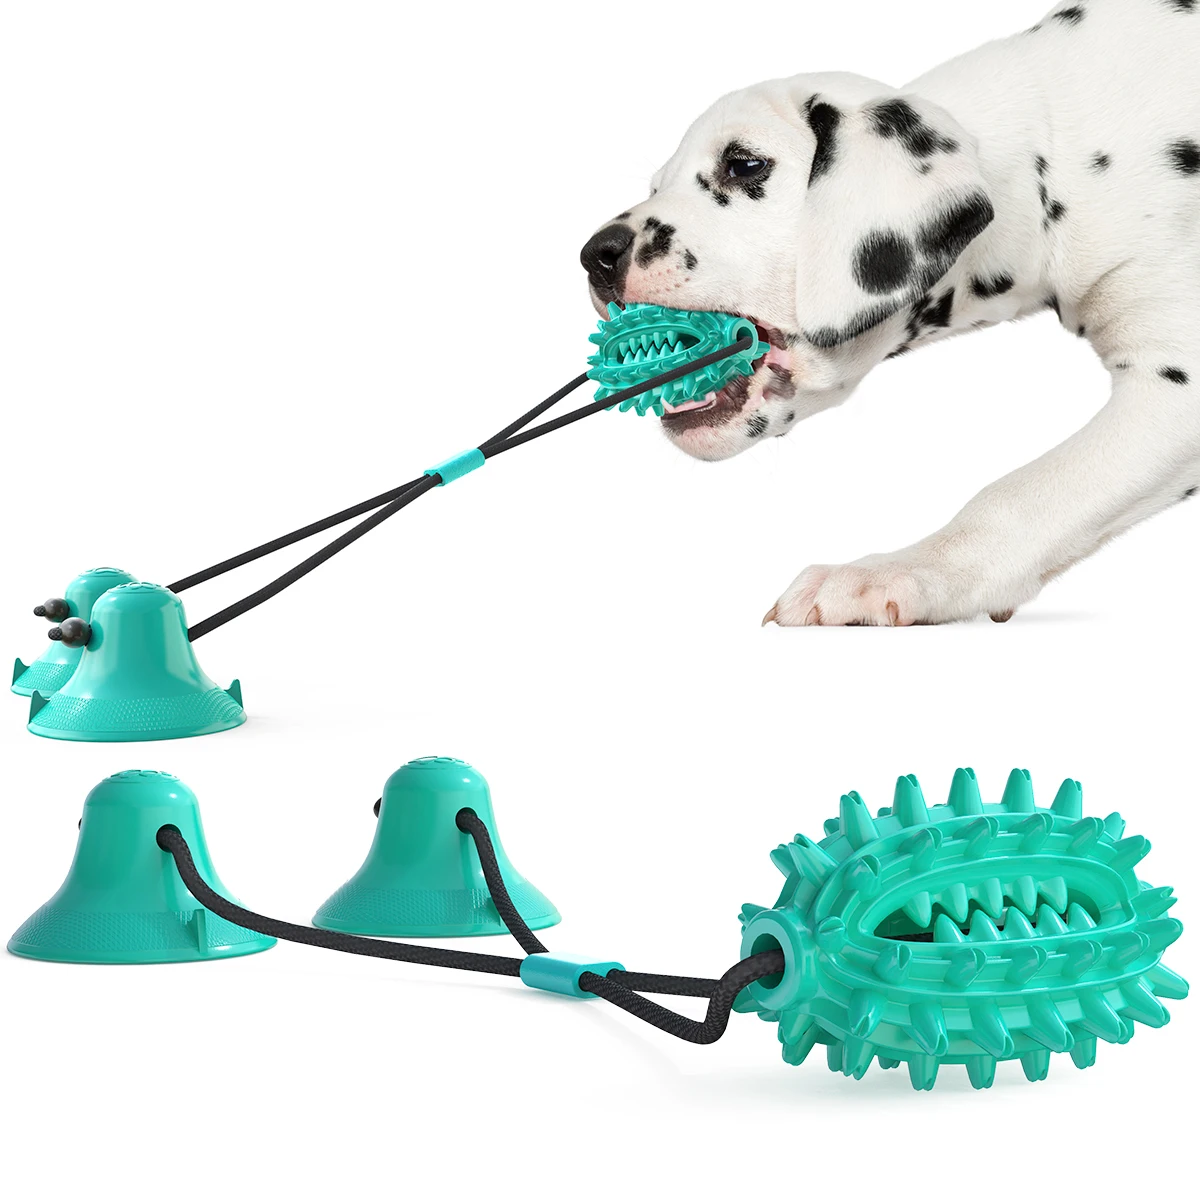 

Wholesale OEM Pet Supplies Interactive Dog Chew Toy Pet Dog Training Toys Ball, Picture shows